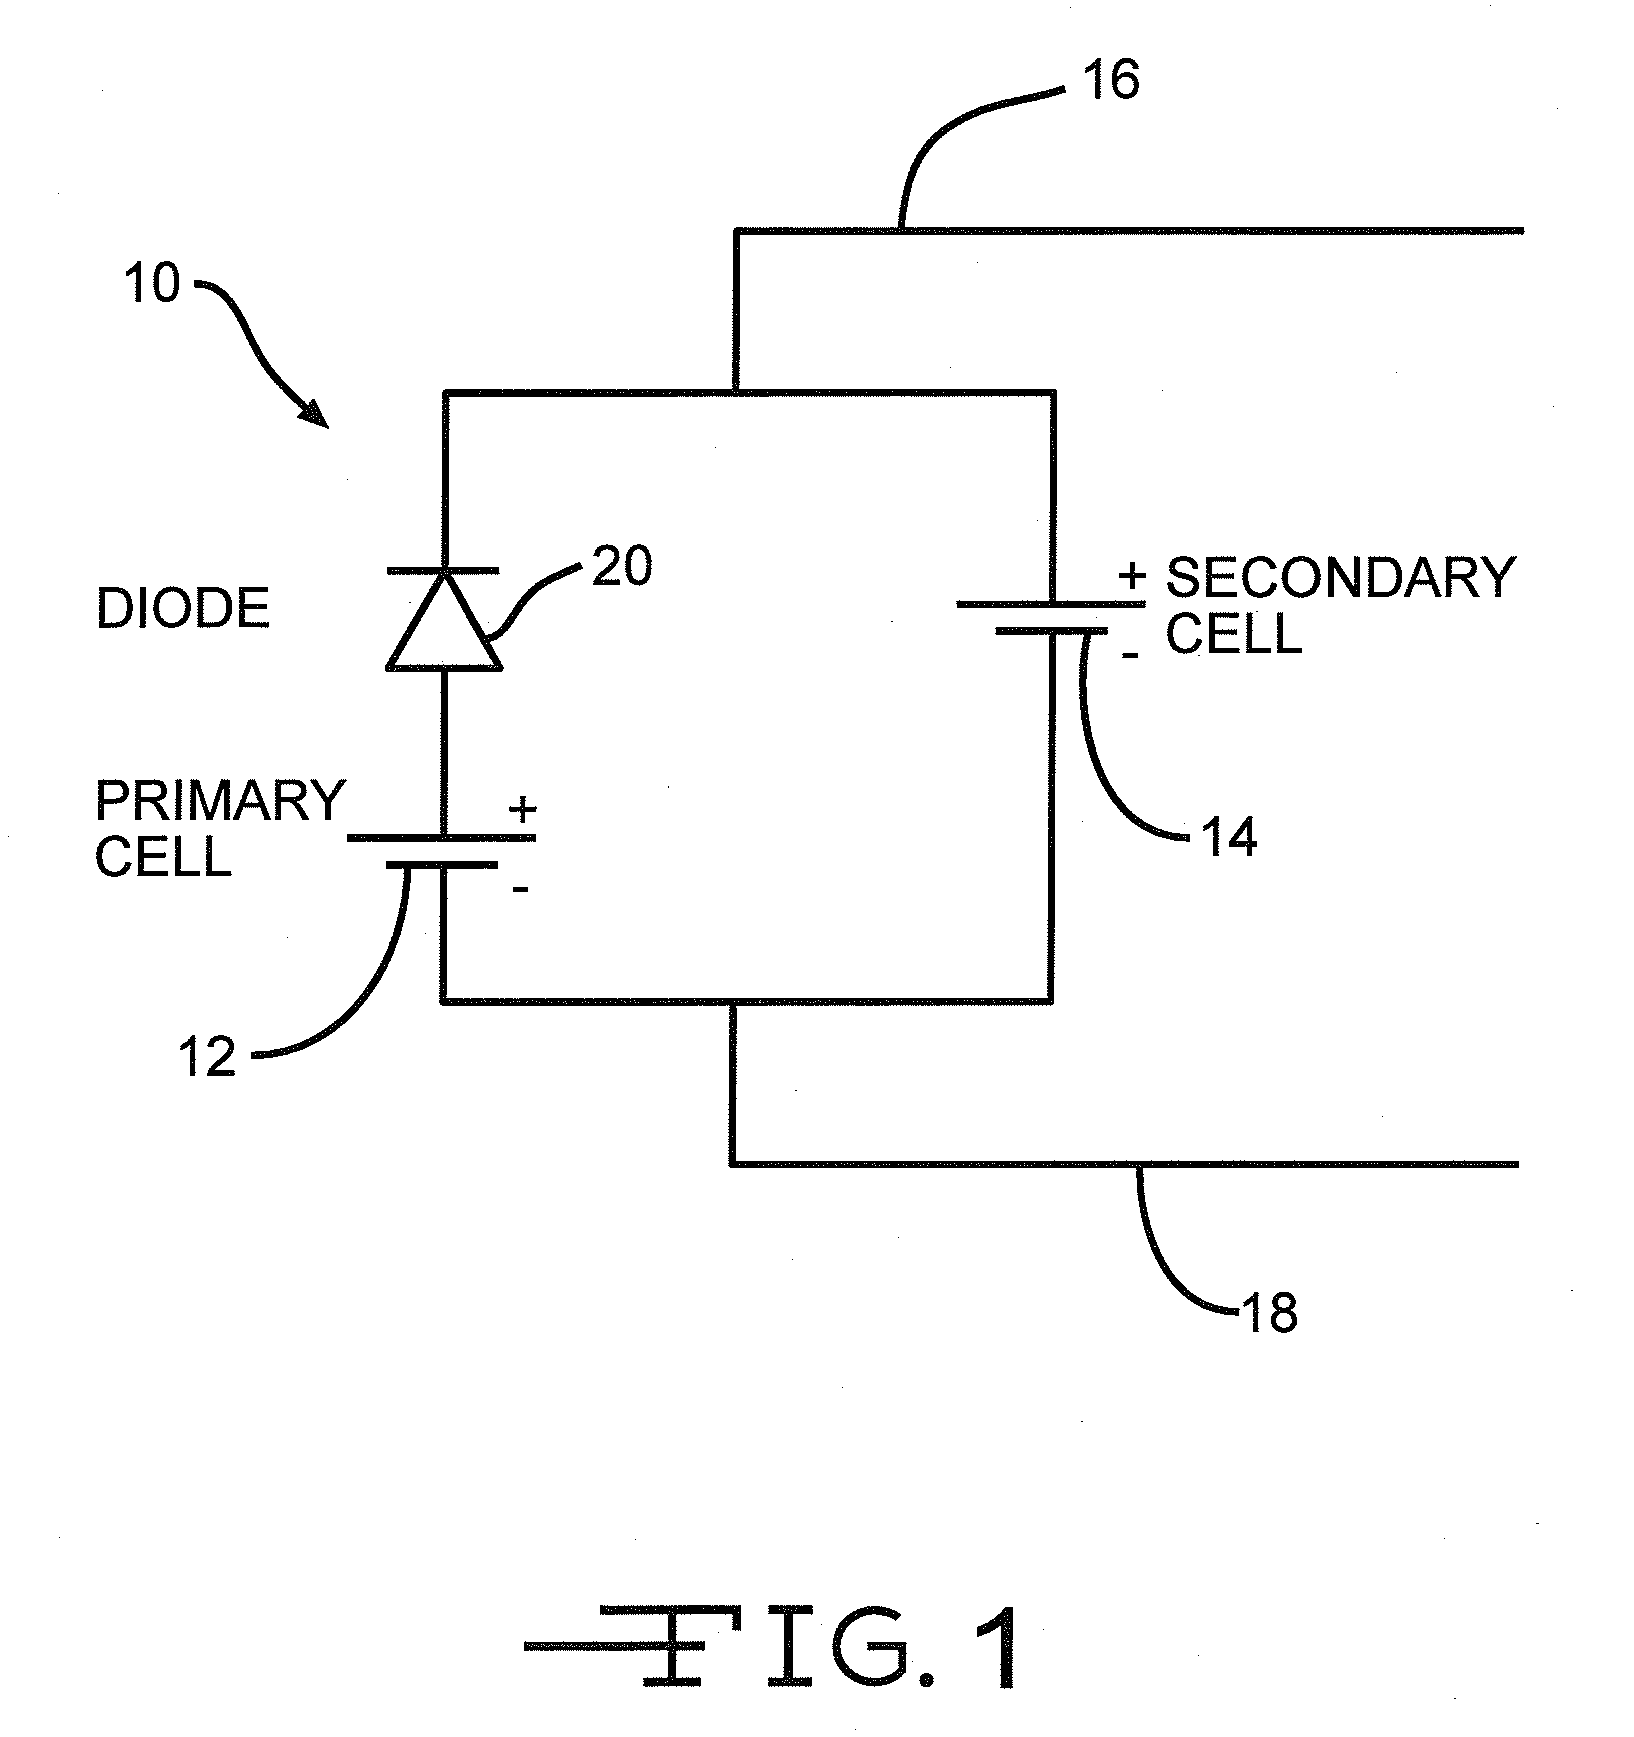 In parallel hybrid power source comprising a lithium/oxyhalide electrochemical cell coupled with a lithium ion cell